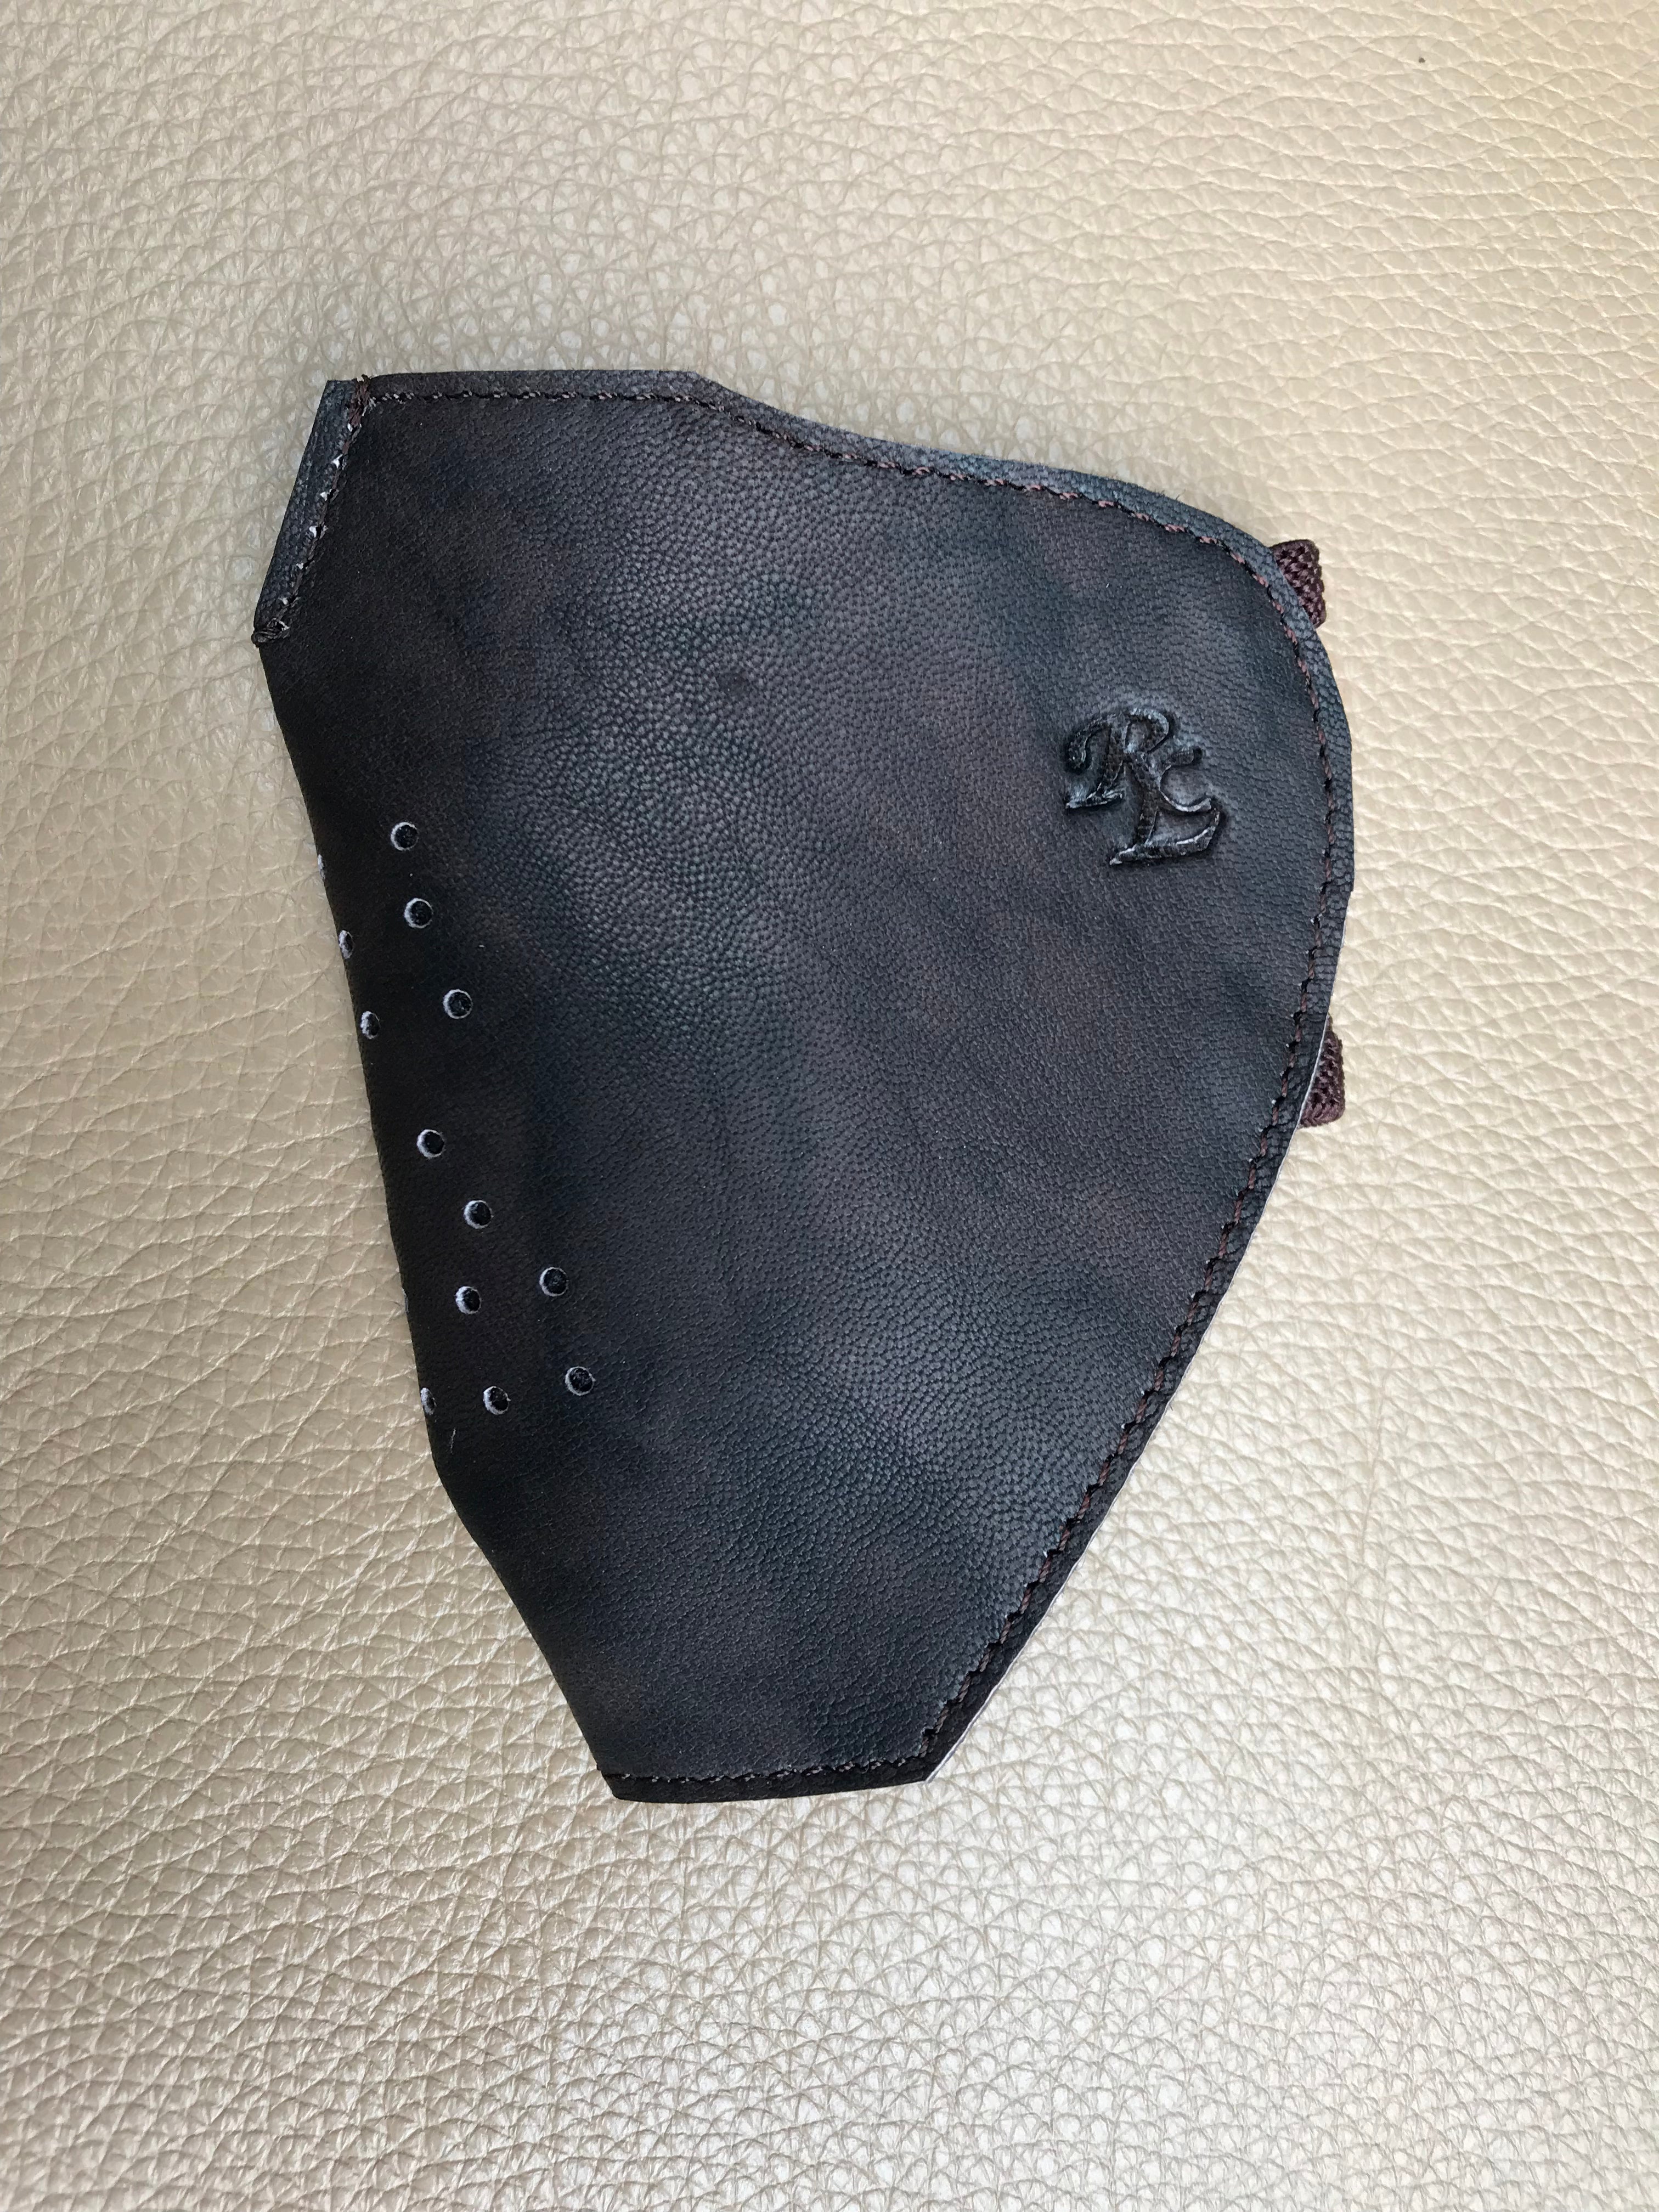 RL Antique Leather Face Mask With Changeable Filters - [walletsnbags_name]